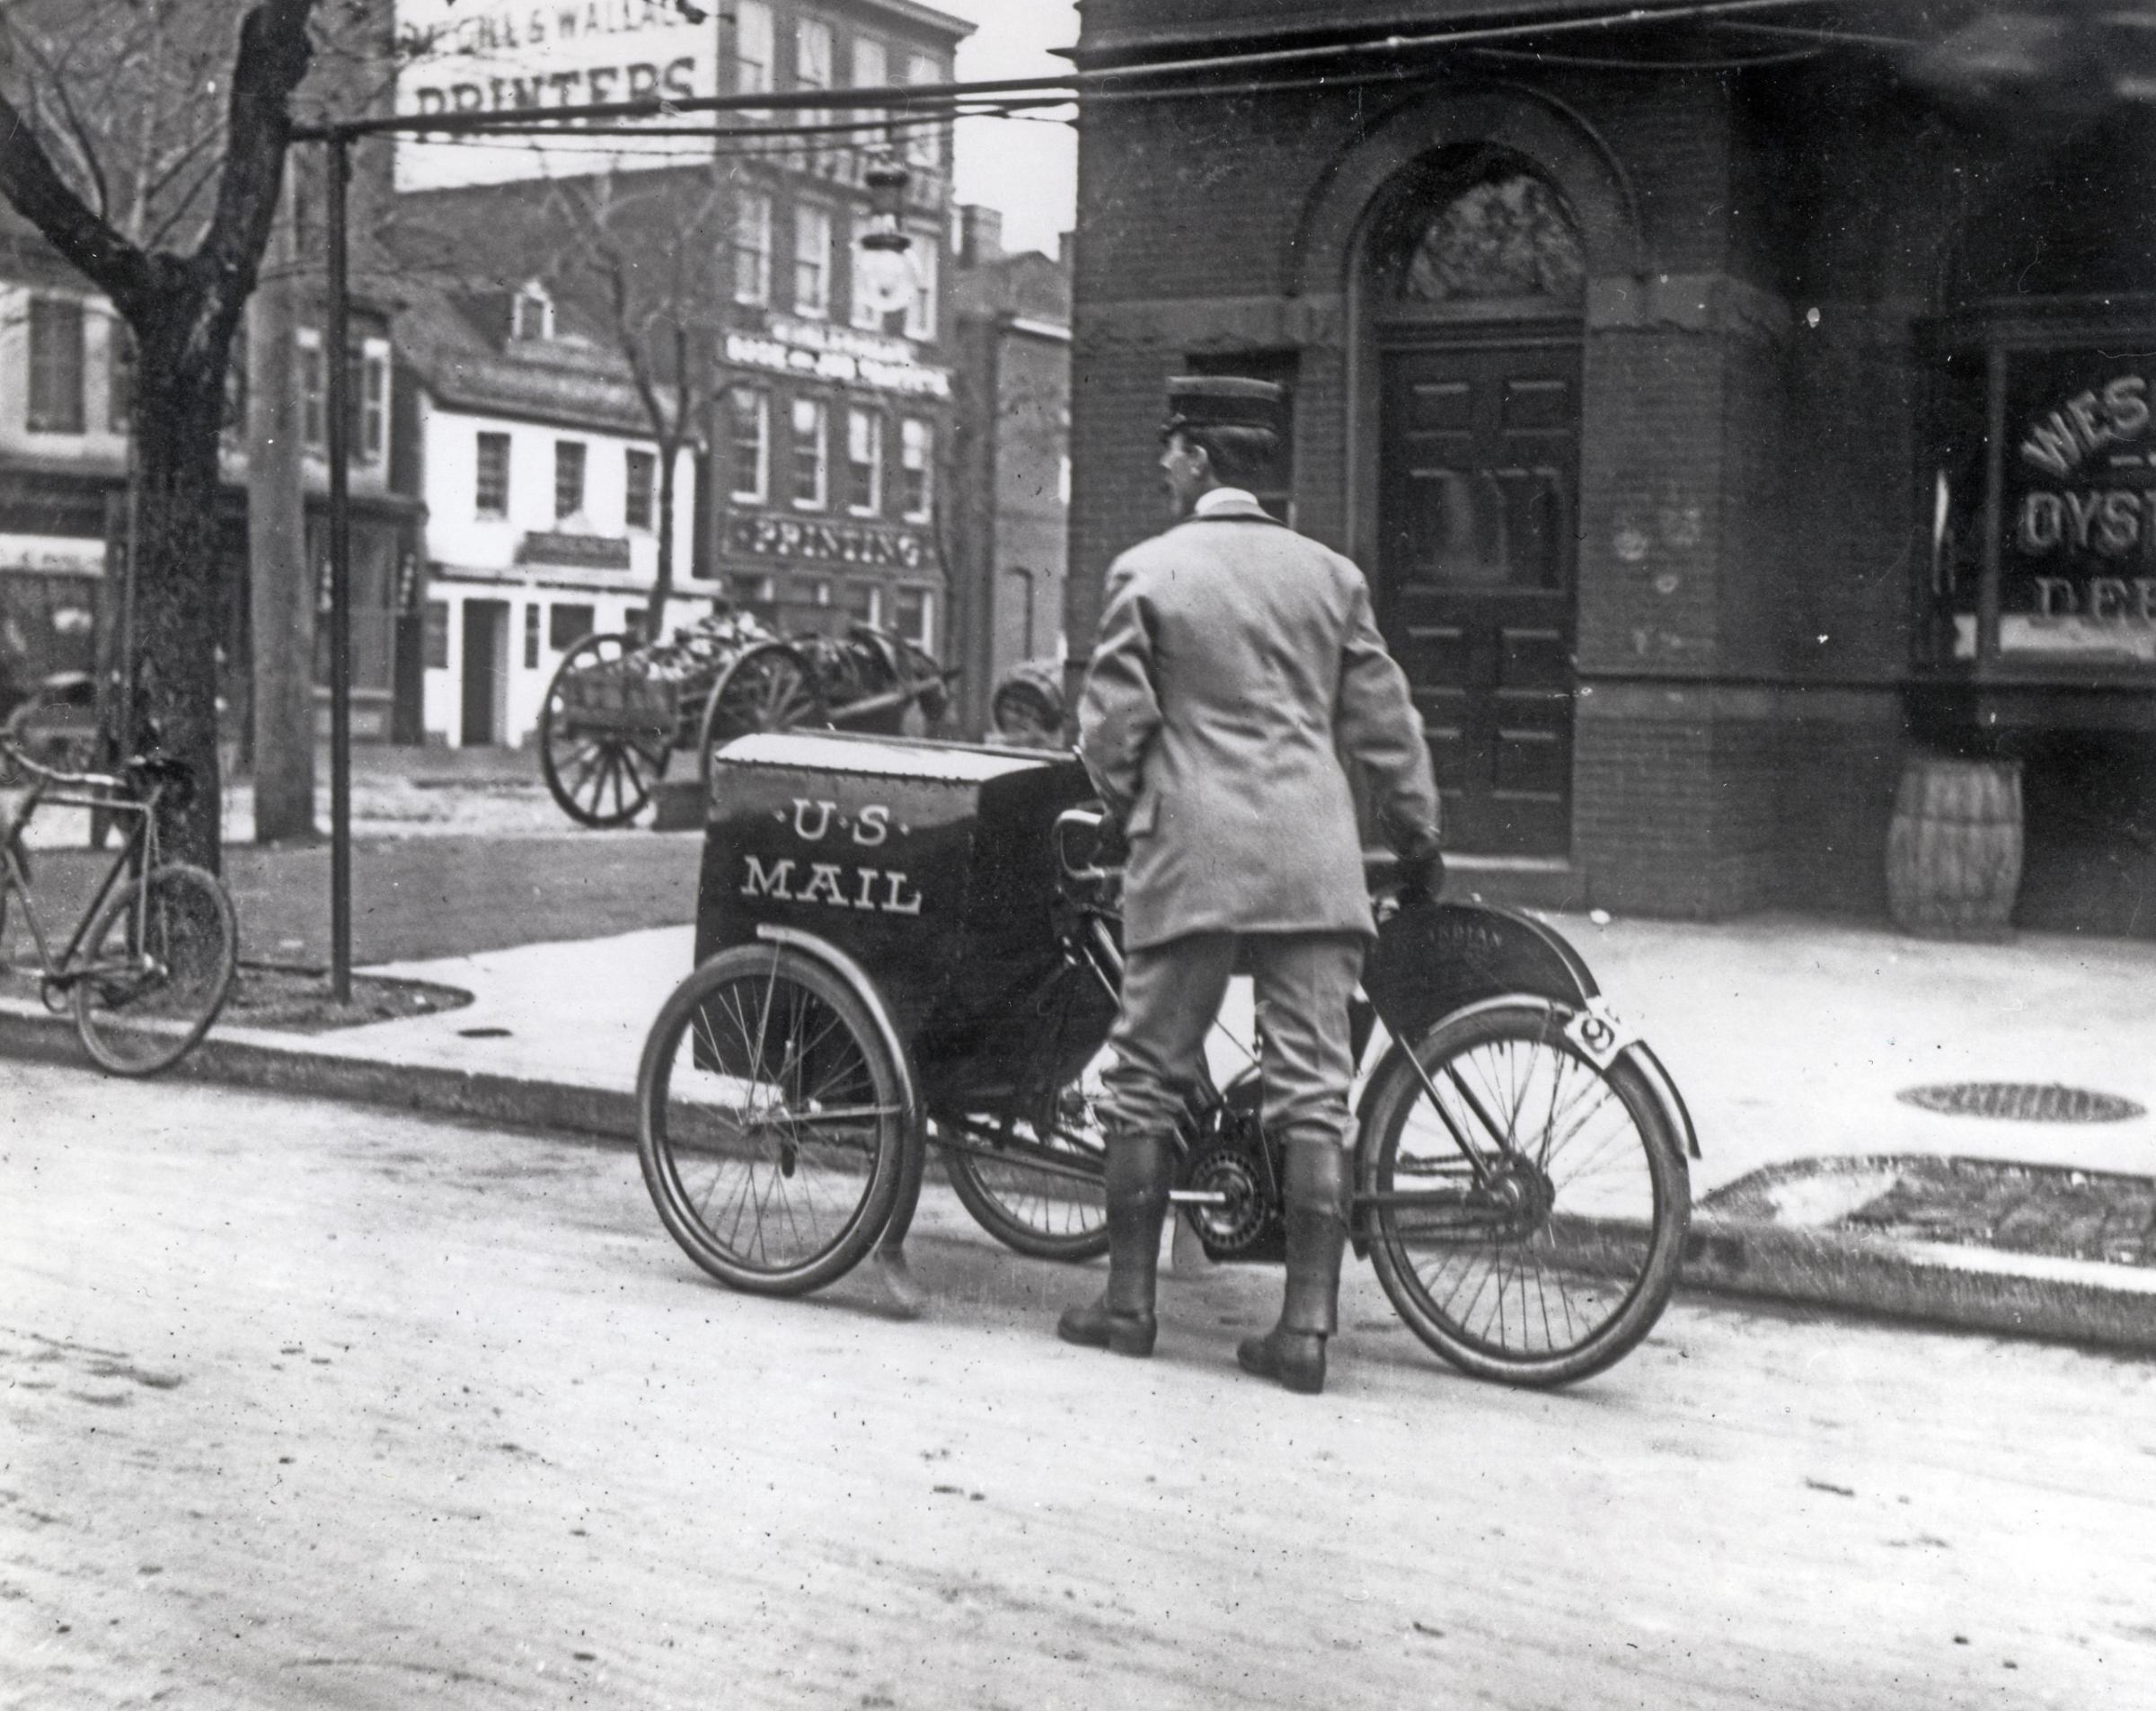 Three-wheeled mail collection Indian motorcycle in Washington, D.C., on the corner of Pennsylvania Avenue and 12th Street. The motorcycle was used only on an experimental basis in DC. 1912.